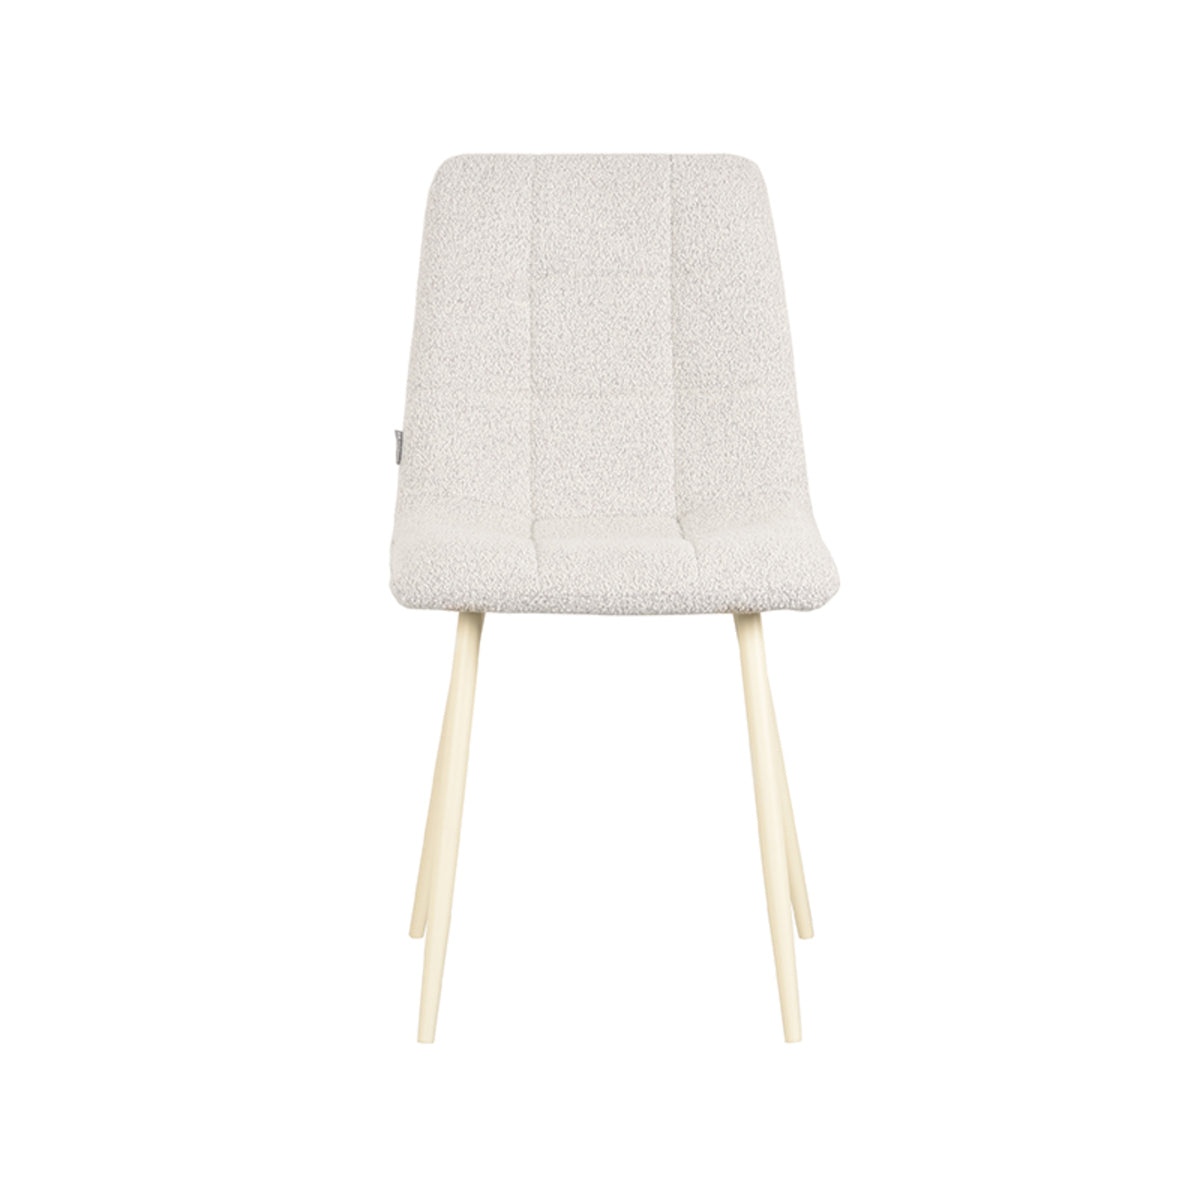 LABEL51 Dining room chair Nino - White - Boucle | 2 pcs